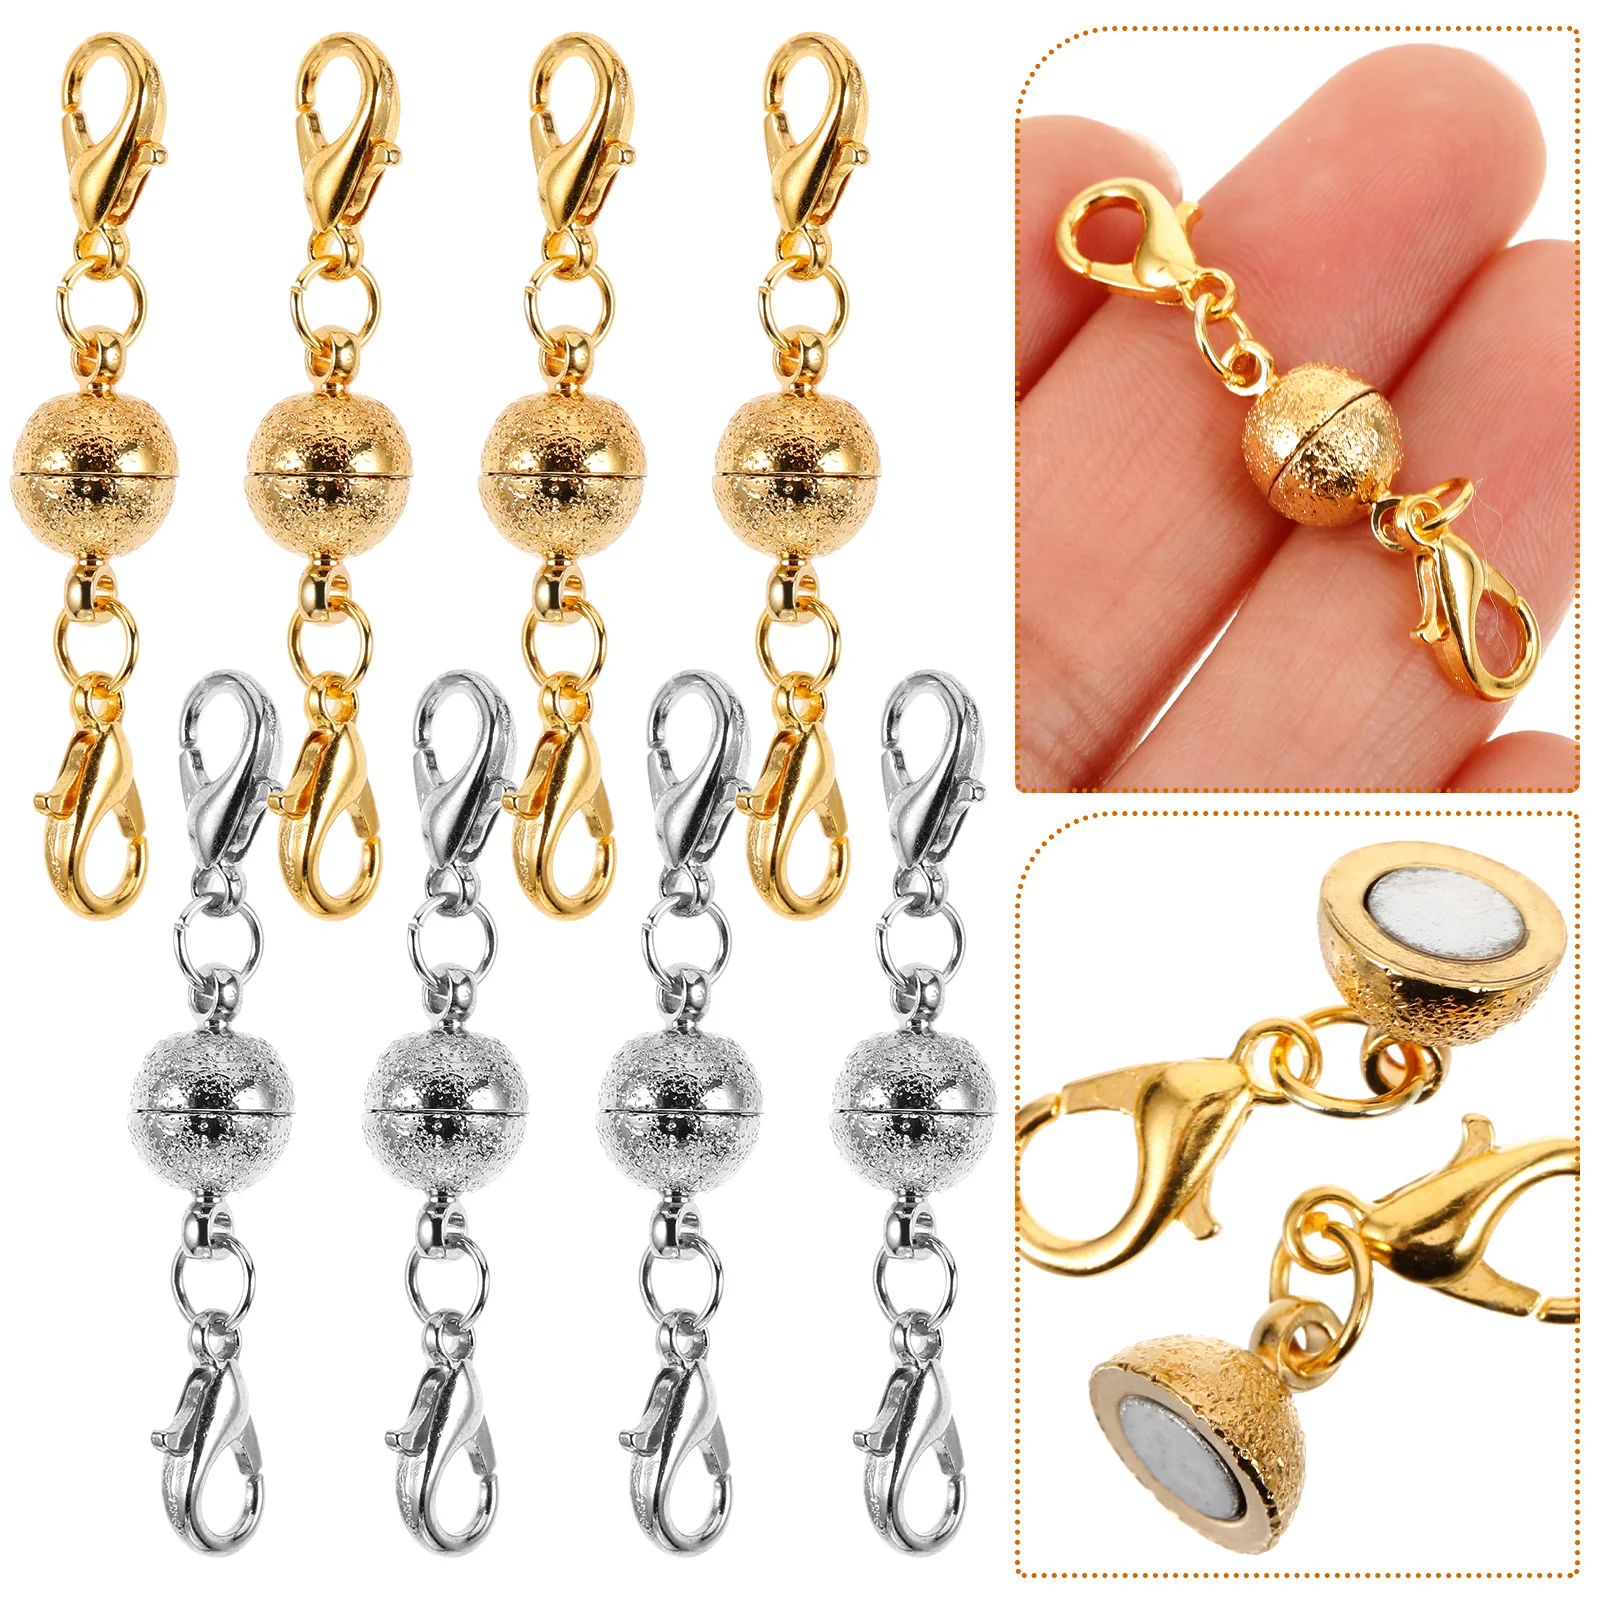 

8 Pcs Magnetic Lobster Clasp Jewlery Making Necklace Jewelry Buckle Bracelet Clasps Charm Small Copper for Necklaces